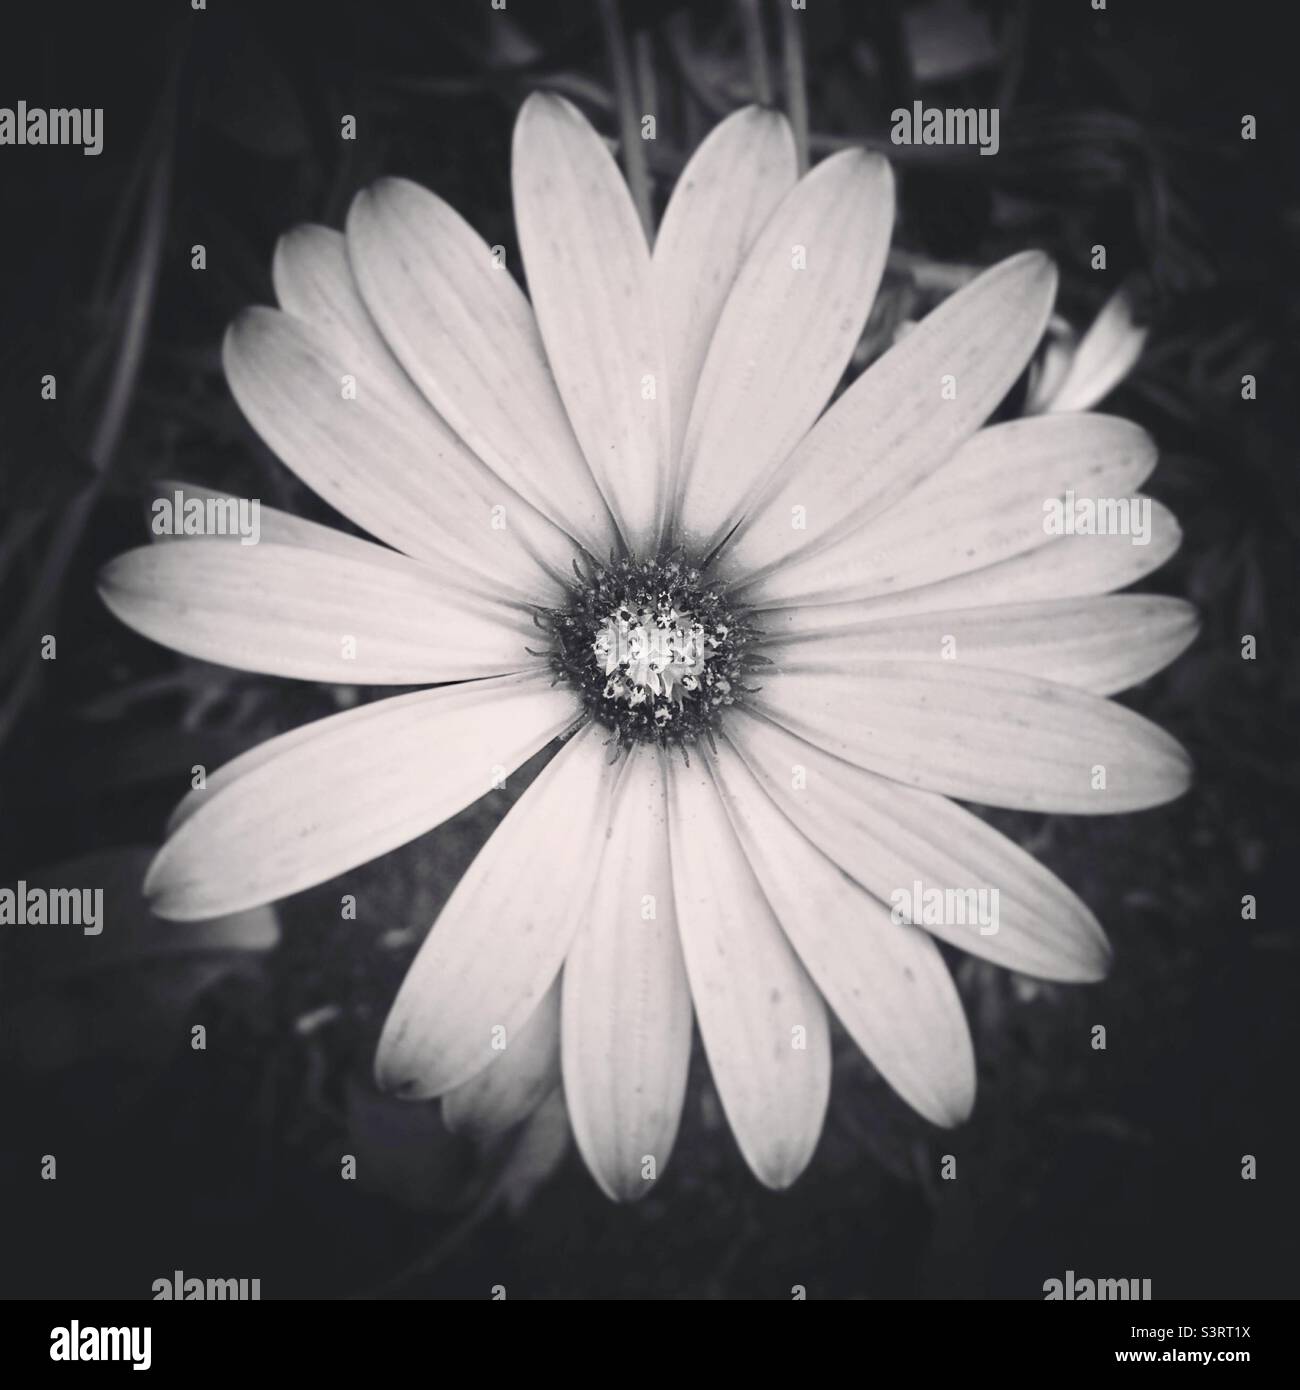 Black and white floral Stock Photo